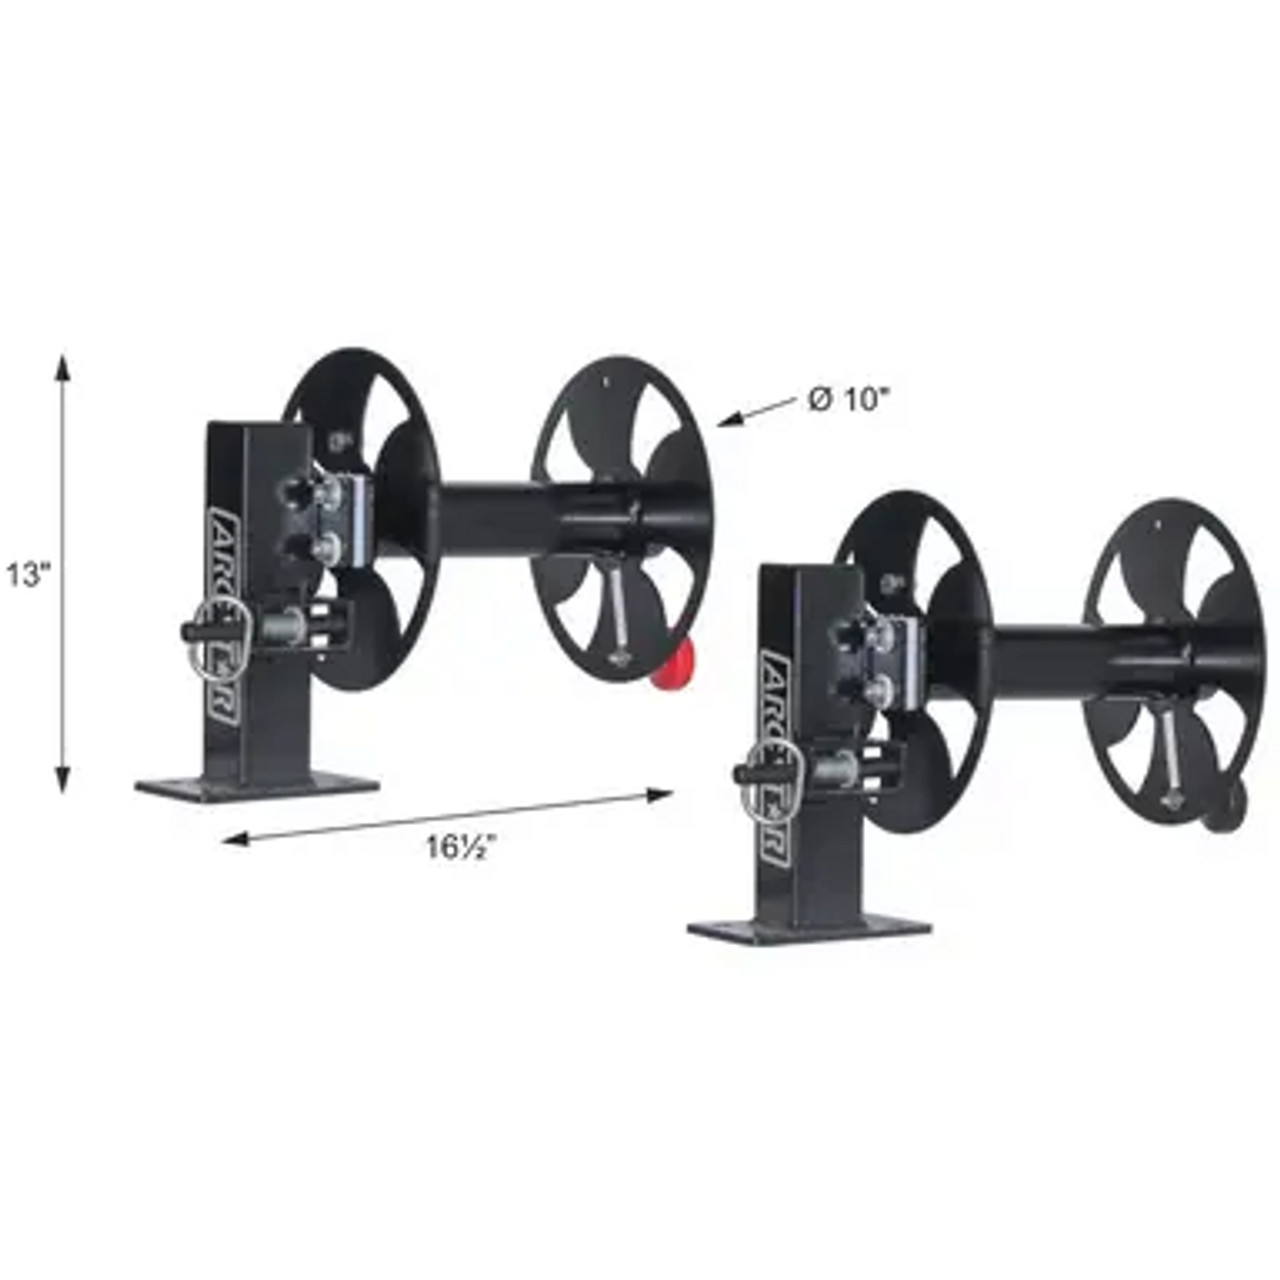 Arc Star Revolution 10 Double Welding Cable Reels with Swivel Base